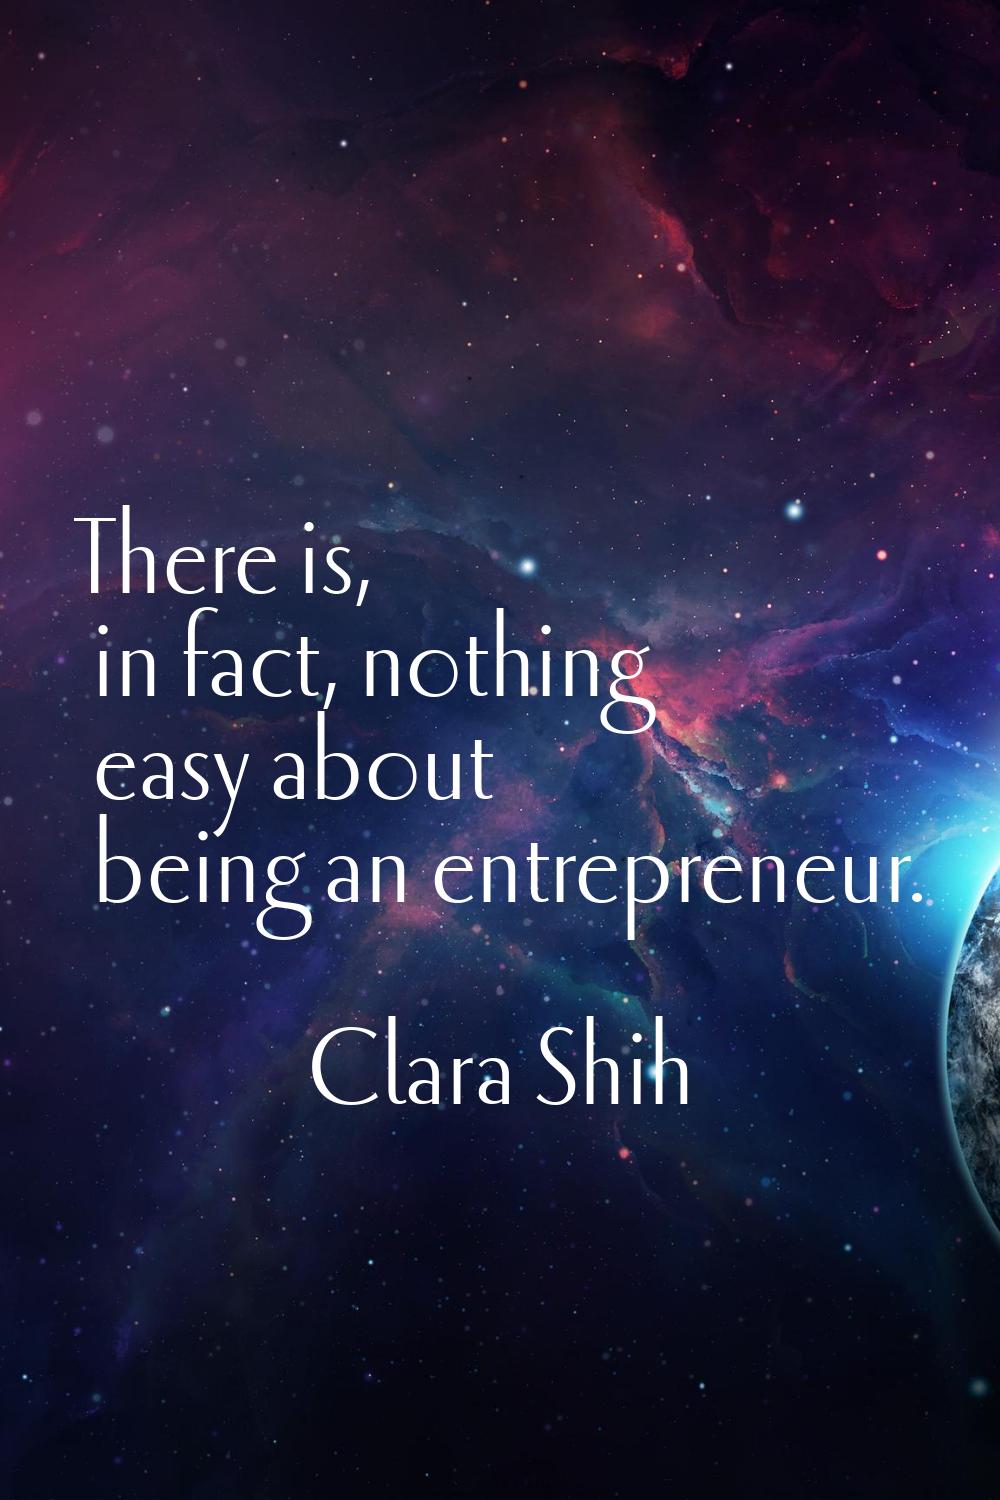 There is, in fact, nothing easy about being an entrepreneur.